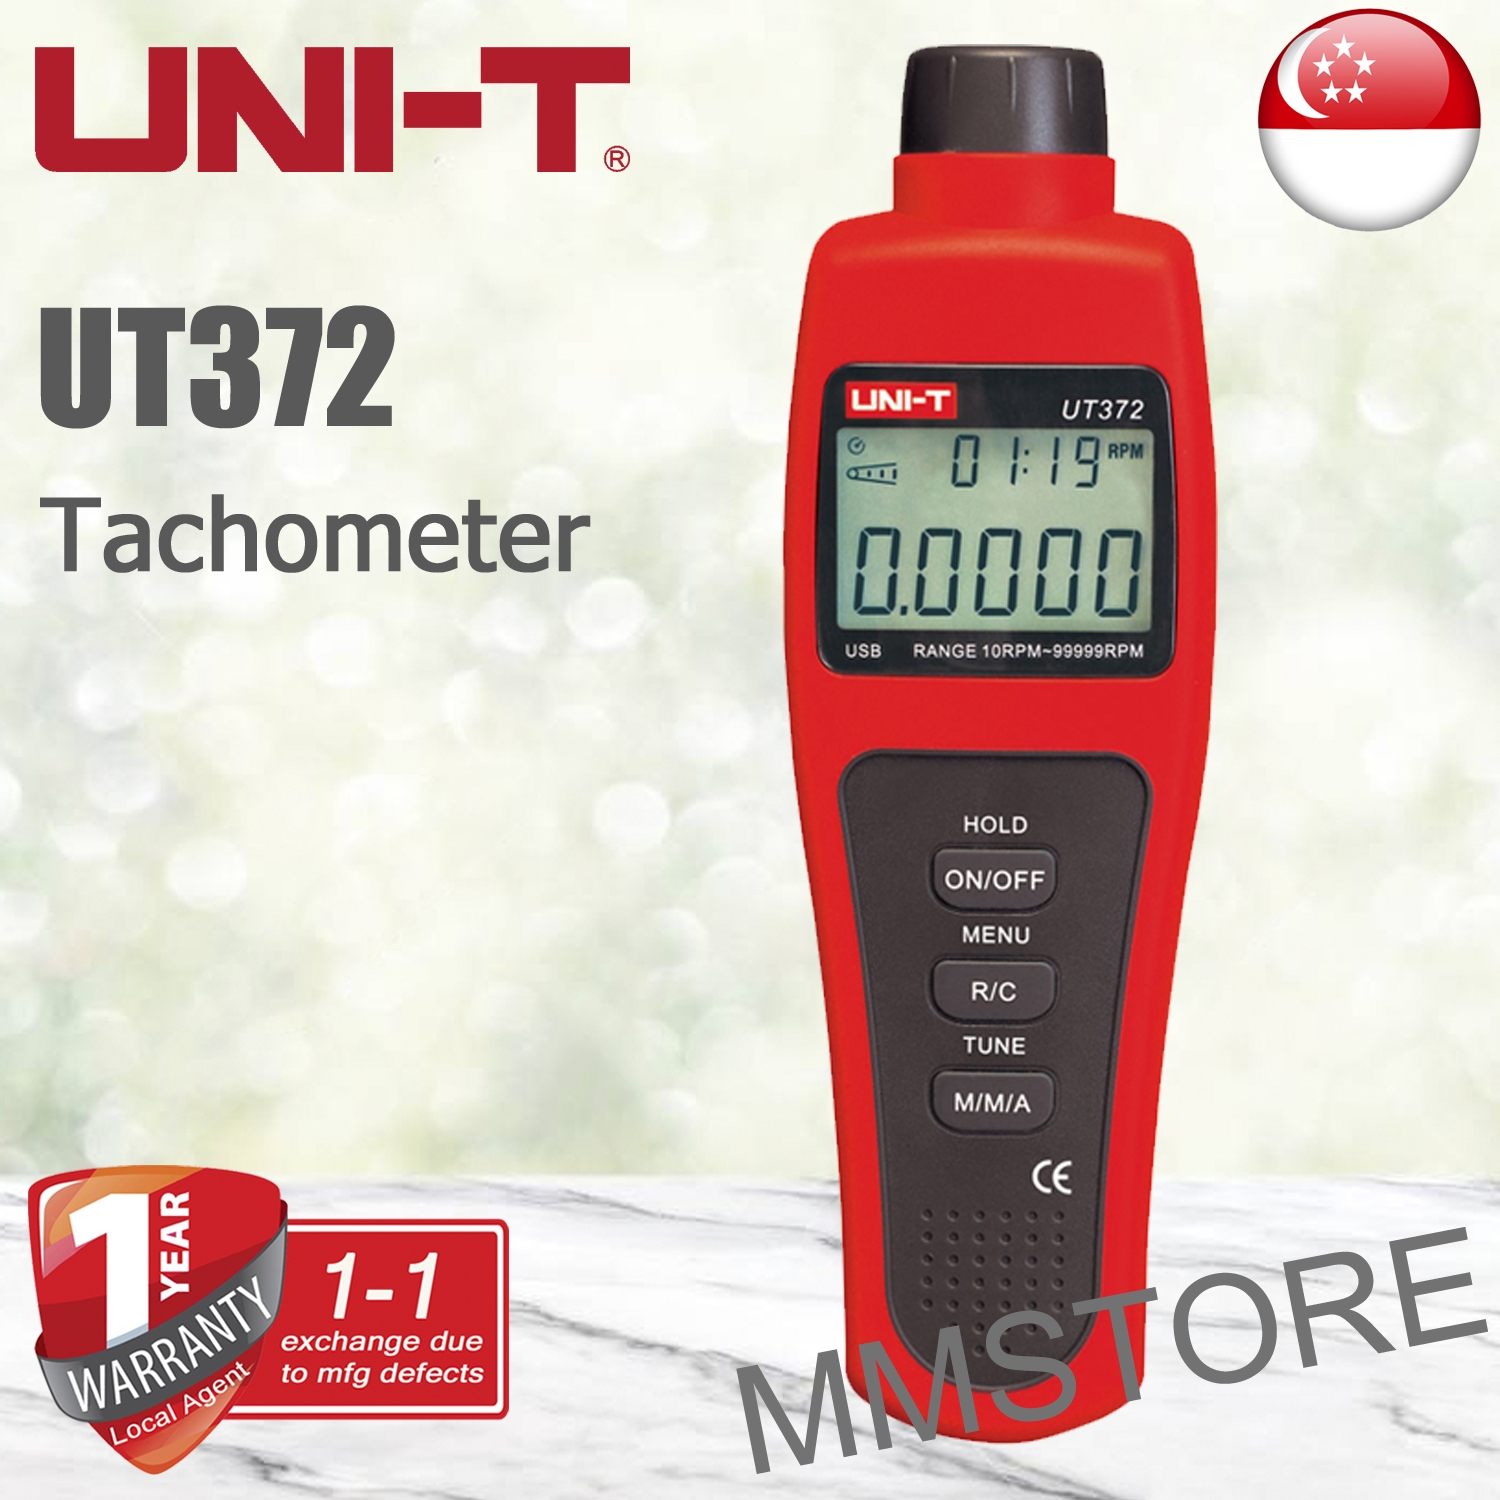 Home - UNI-T  Measurement Meters, Testing Instruments and Thermal